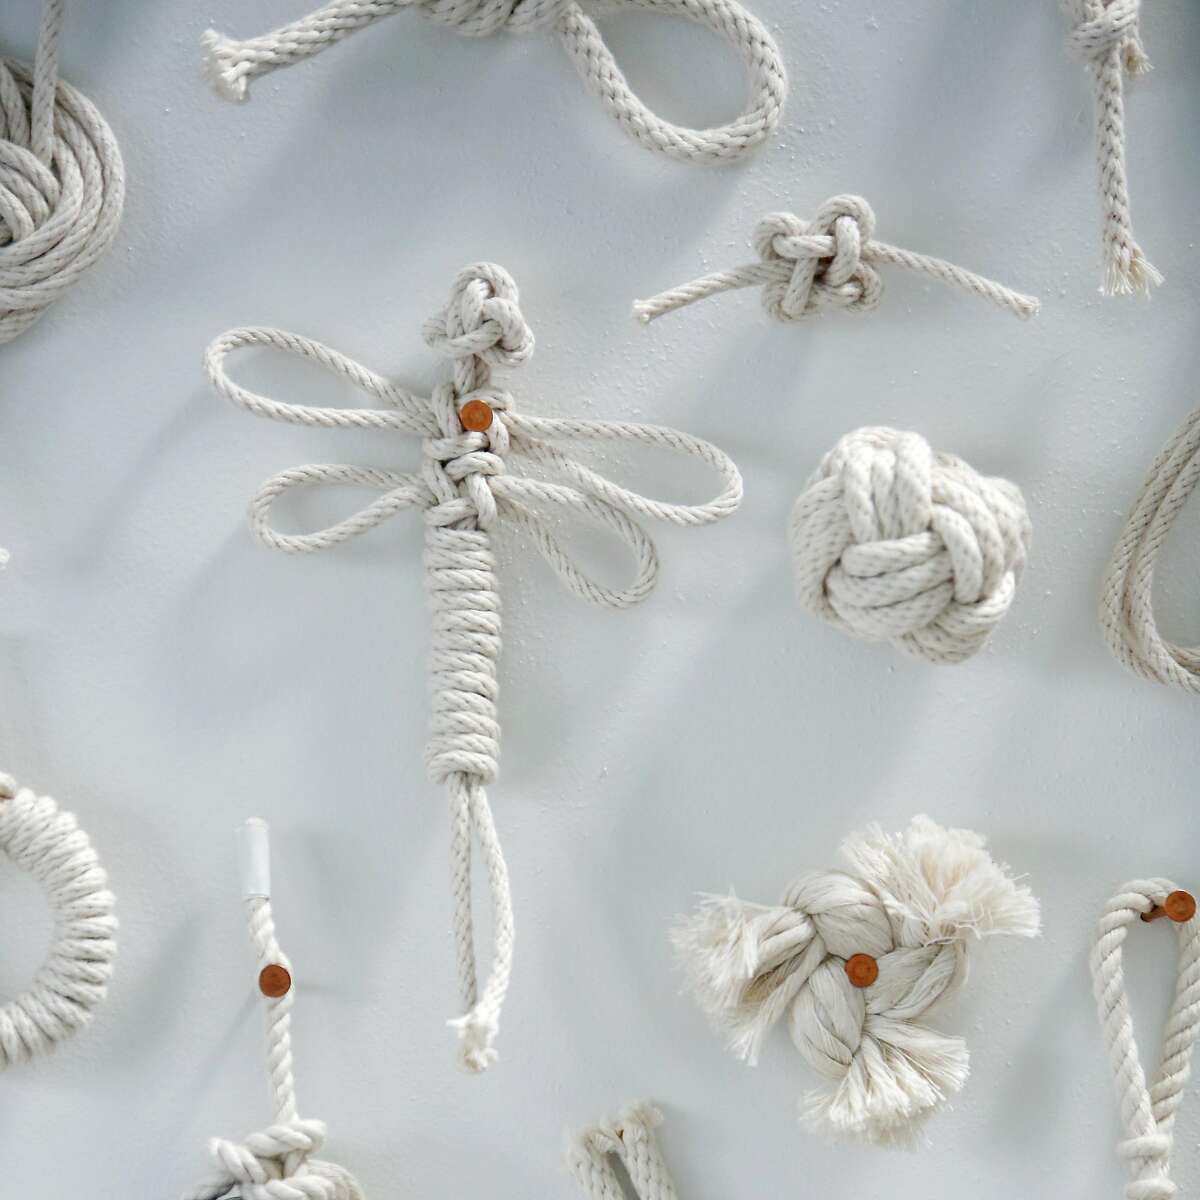 A section of Windy Chien's "A Year of Knots" is seen on her studio wall on Tuesday, September 13, 2016 in San Francisco, California.